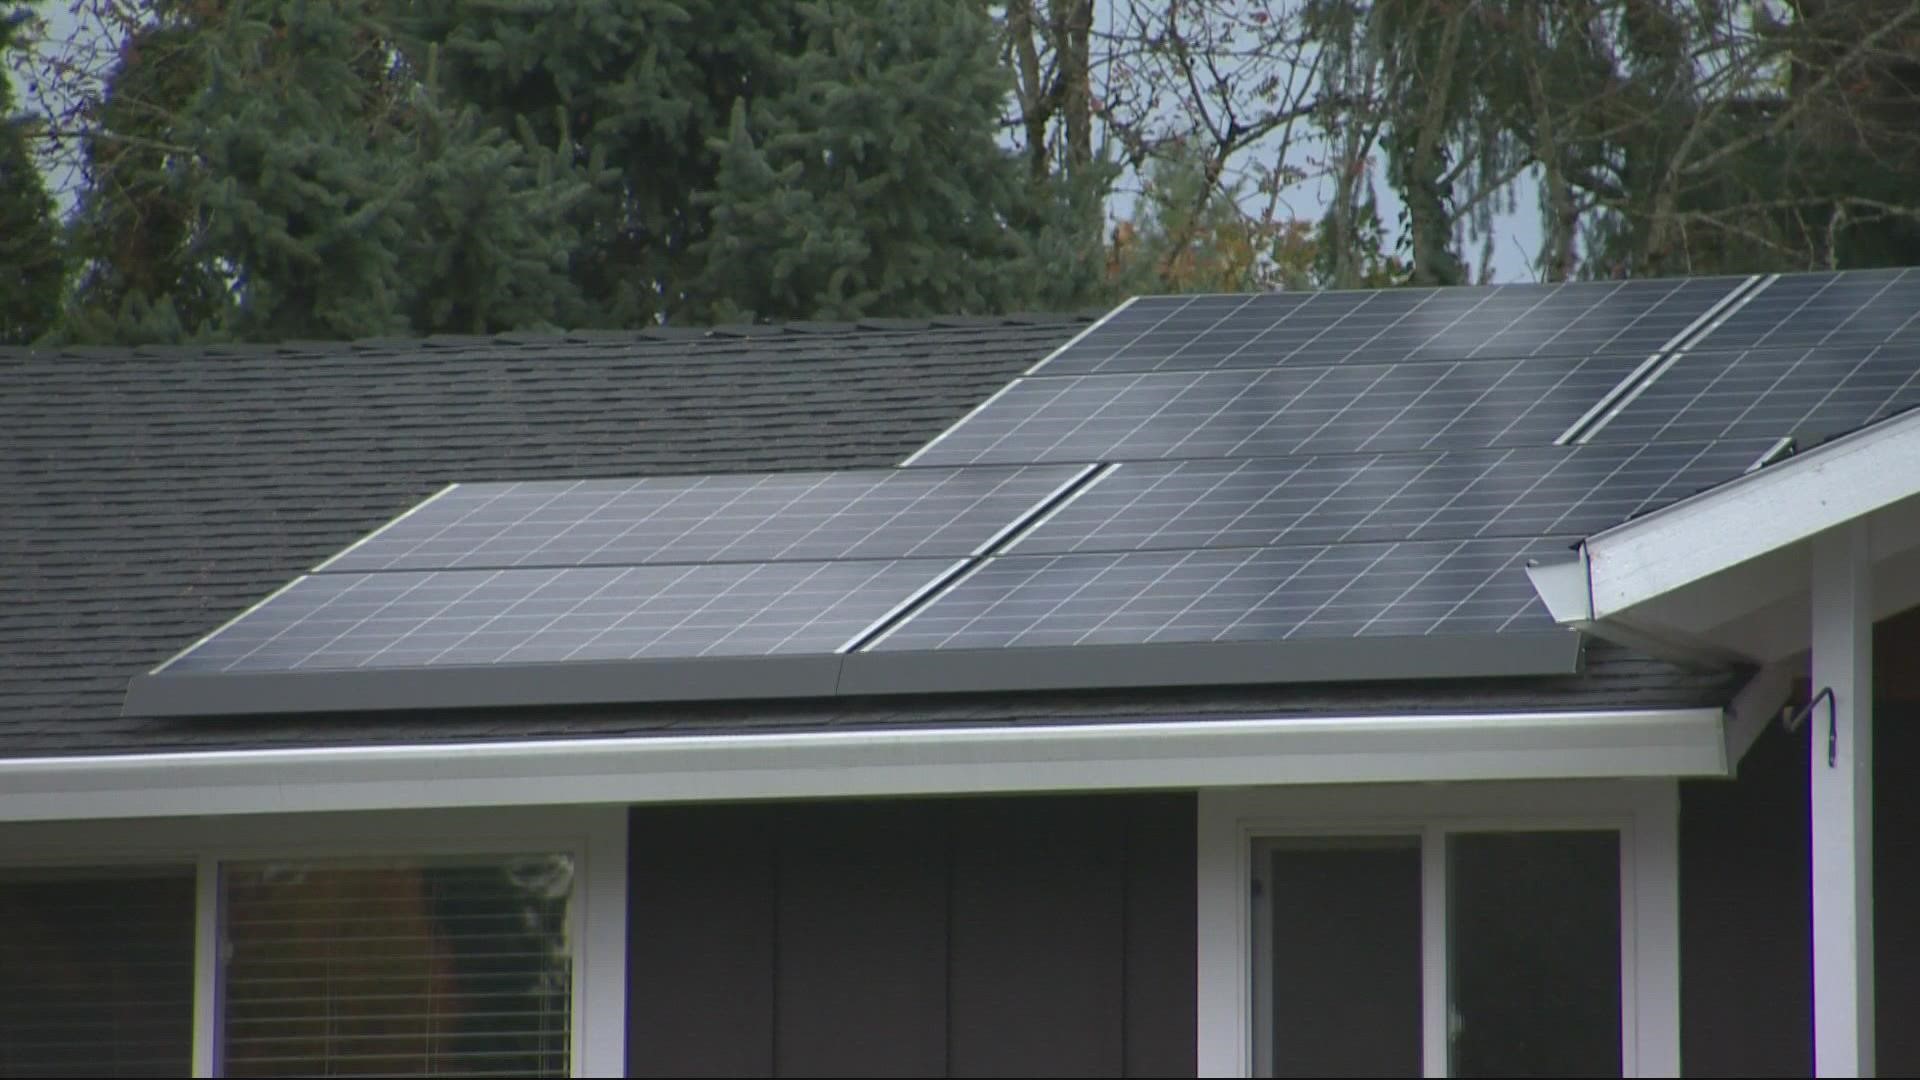 Part of PGE's plan includes buying back electricity from customers and eliminating its greenhouse gas emissions by 2040. KGW's Pat Dooris reports.